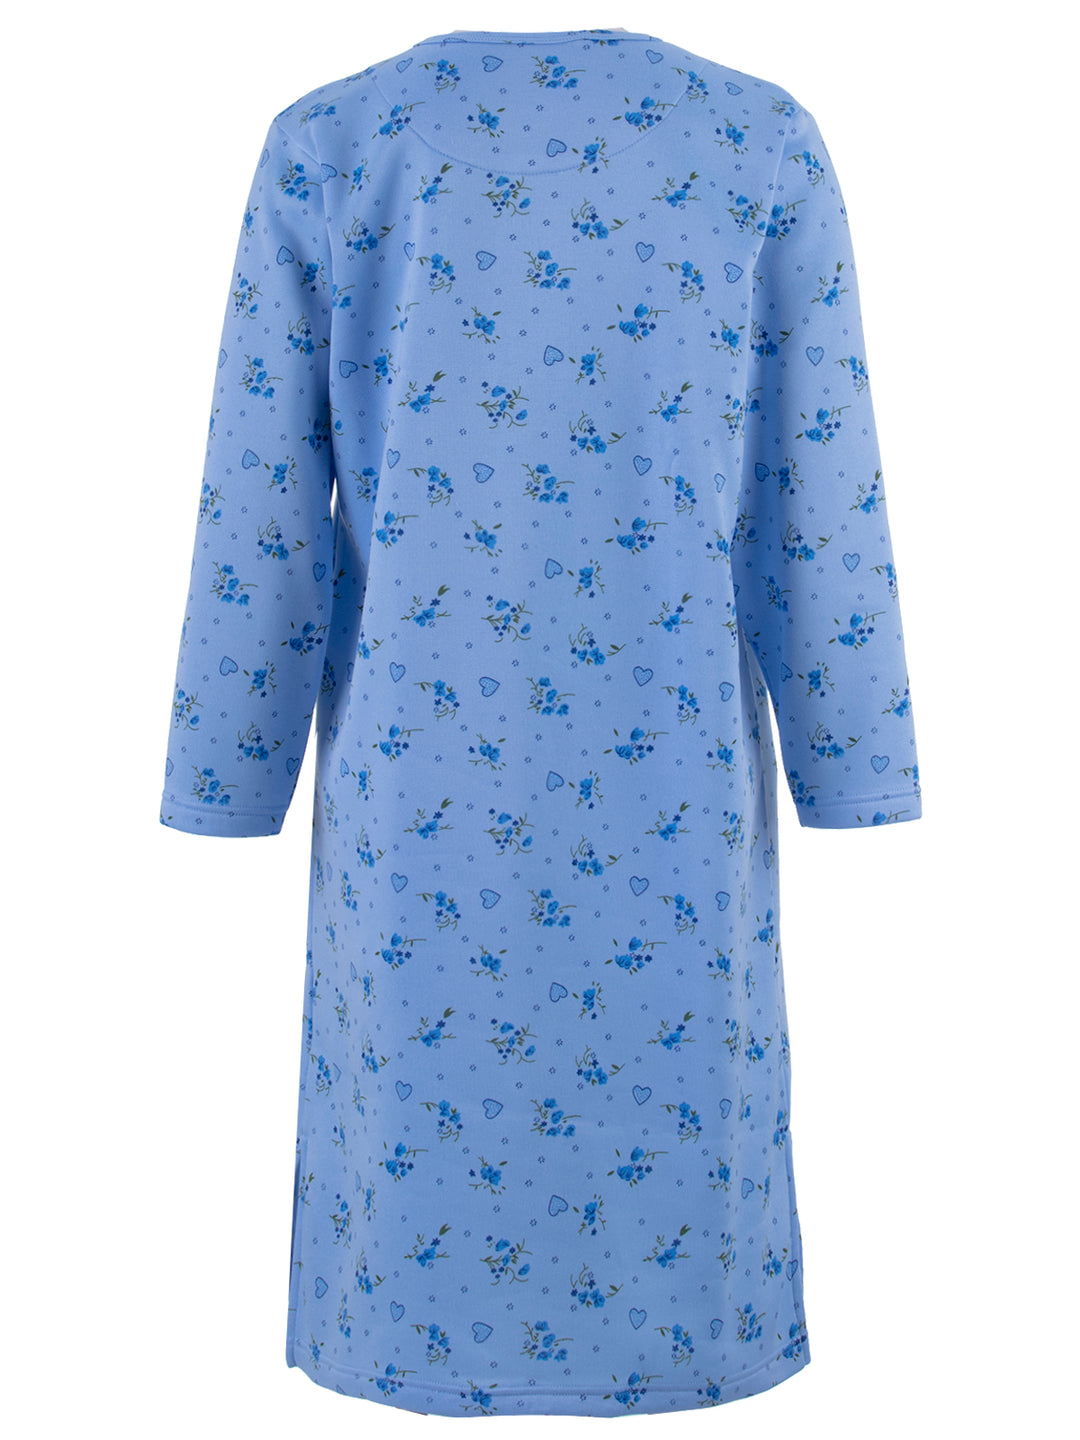 Thermal nightgown - heart flowers